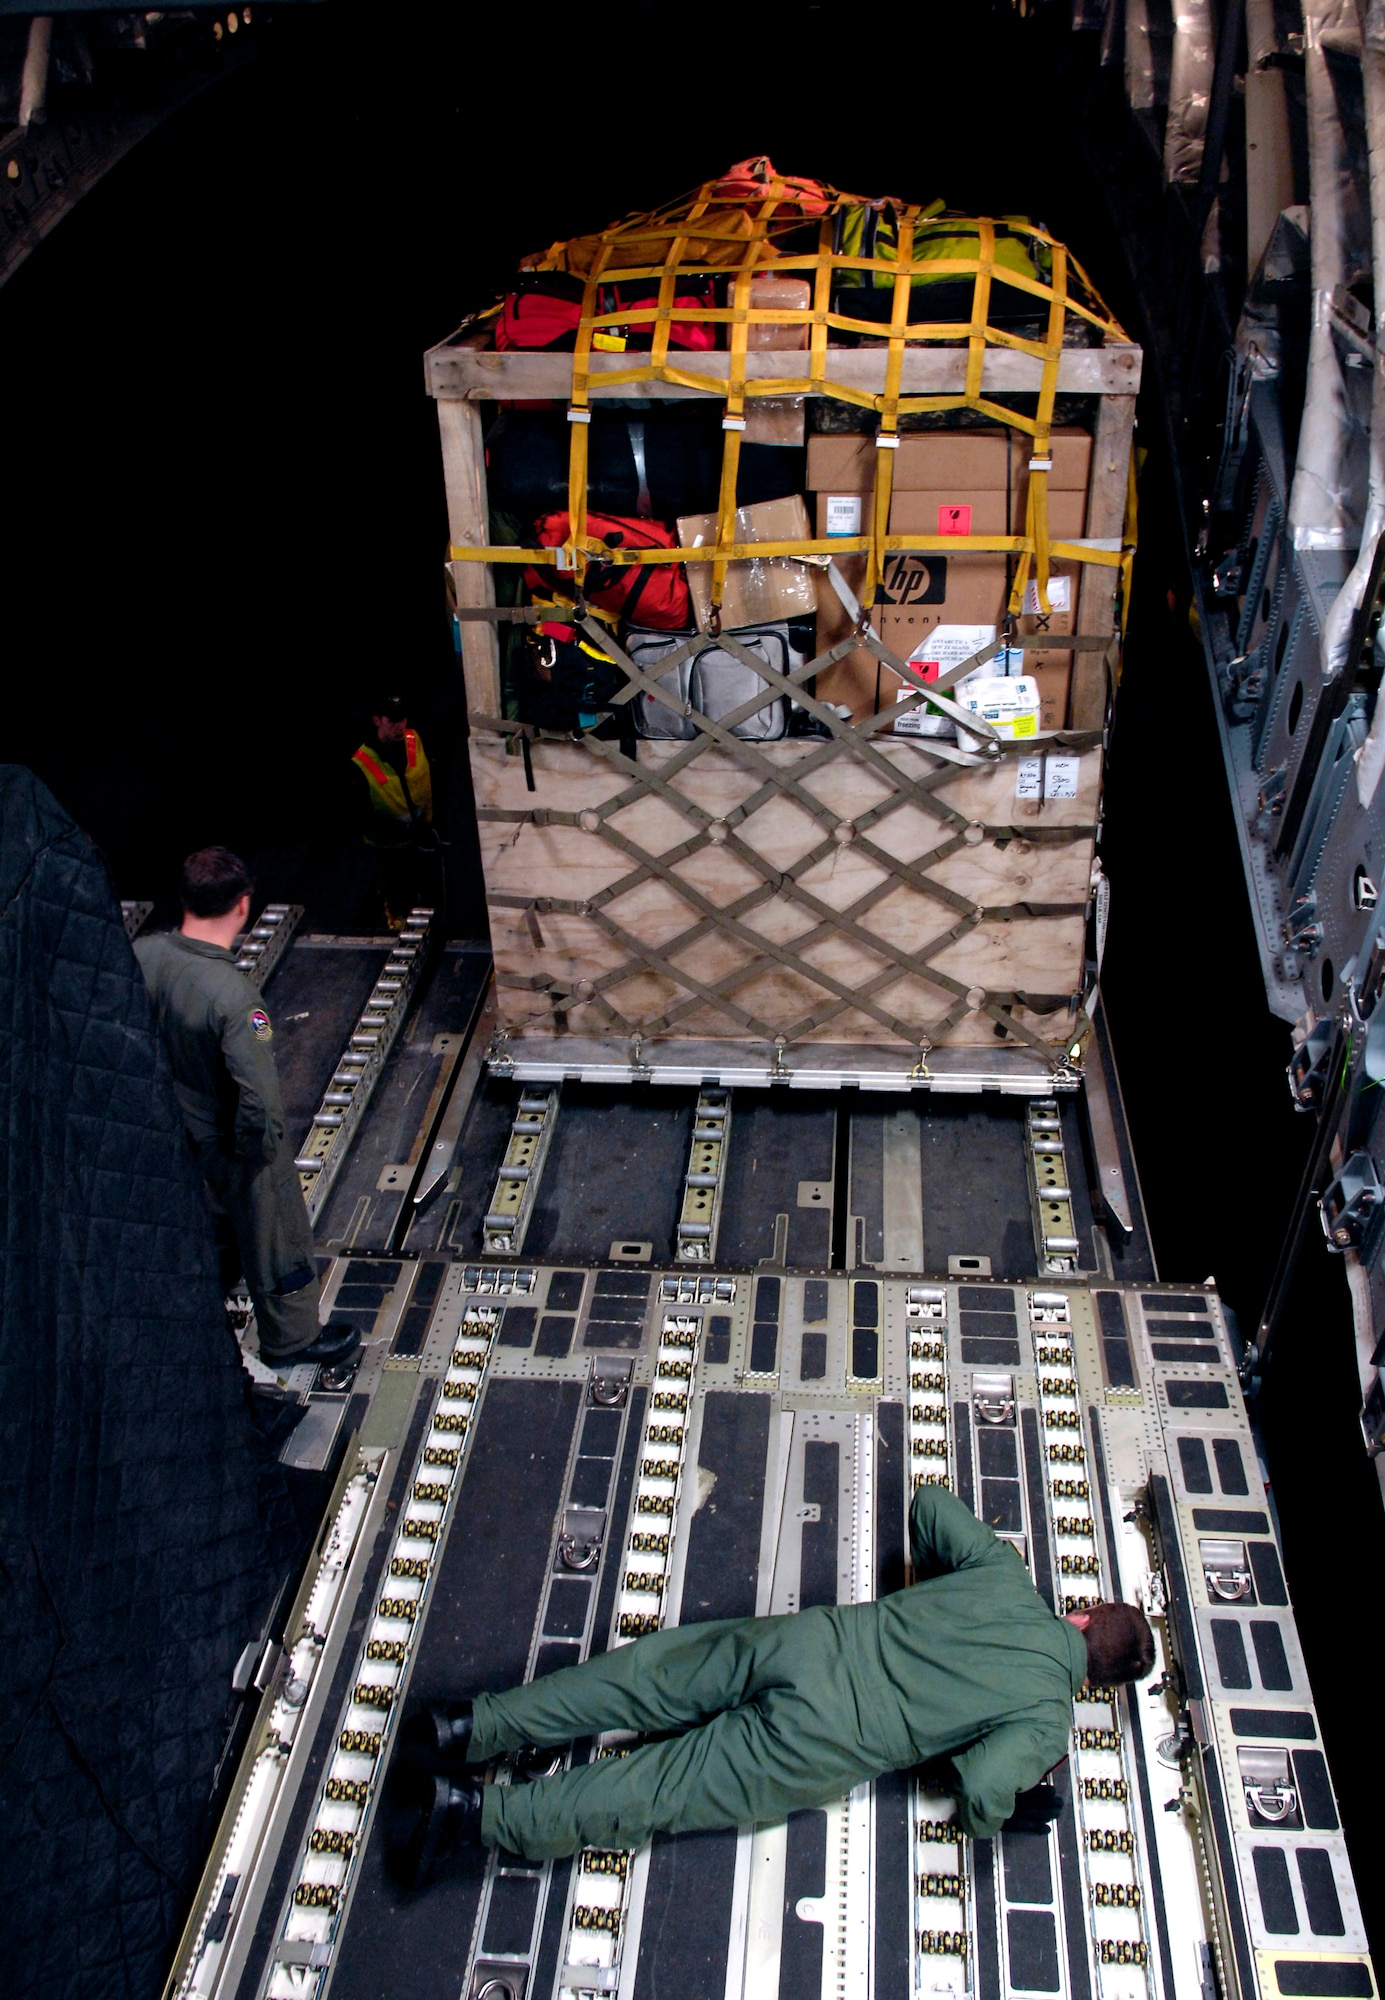 Tech. Sgt. Kris Albertson checks the clearance of a cargo pallet being loaded onto a C-17 Globemaster III during Operation Deep Freeze Aug. 25 at Christchurch, New Zealand. A C-17 and 31 Airmen from McChord Air Force Base, Wash., conducted the annual winter fly-in augmentation of scientists, support staff, food and equipment for the U.S. Antarctic Program at McMurdo Station, Antarctica. (U.S. Air Force photo/Tech. Sgt. Shane A. Cuomo) 
